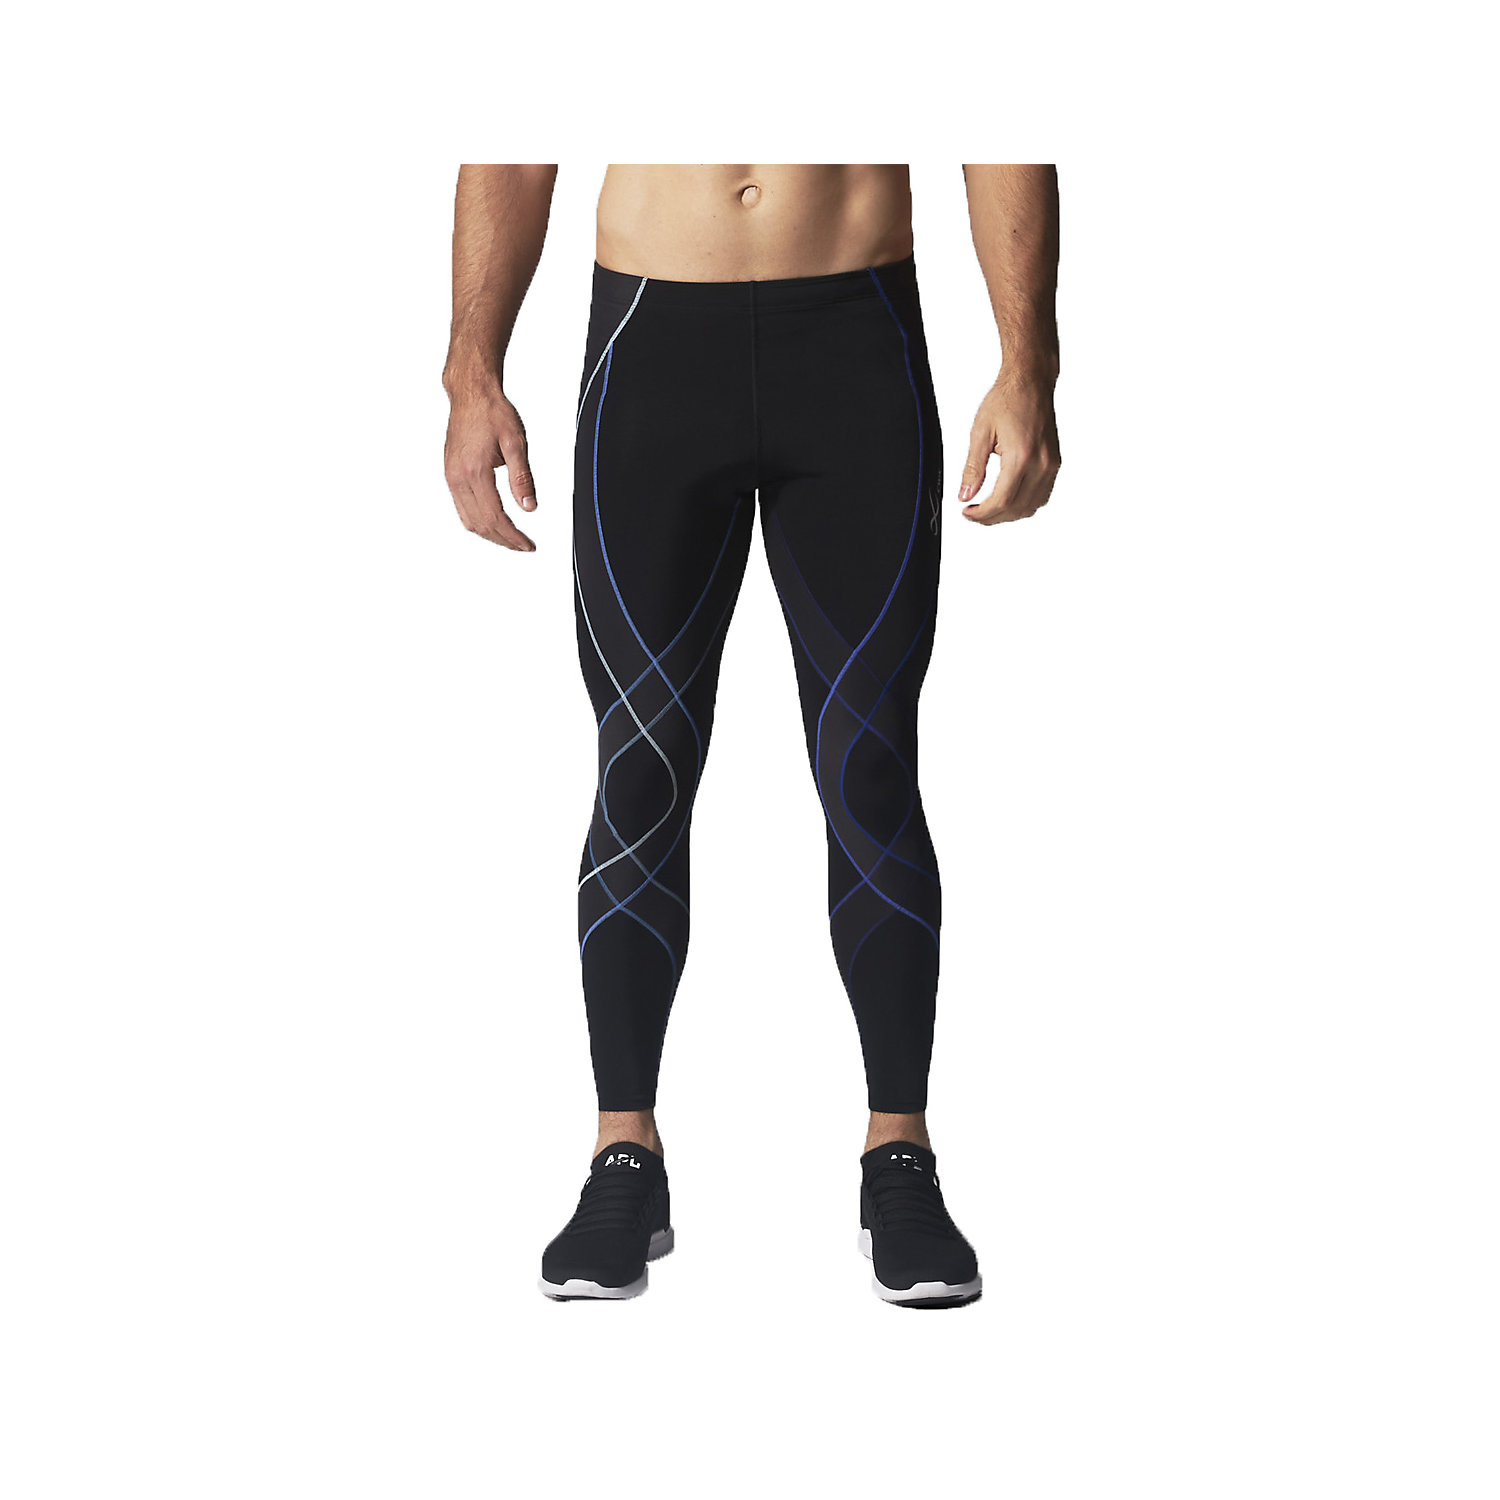 CW-X Mens Endurance Generator Joint & Muscle Support Compression Tight